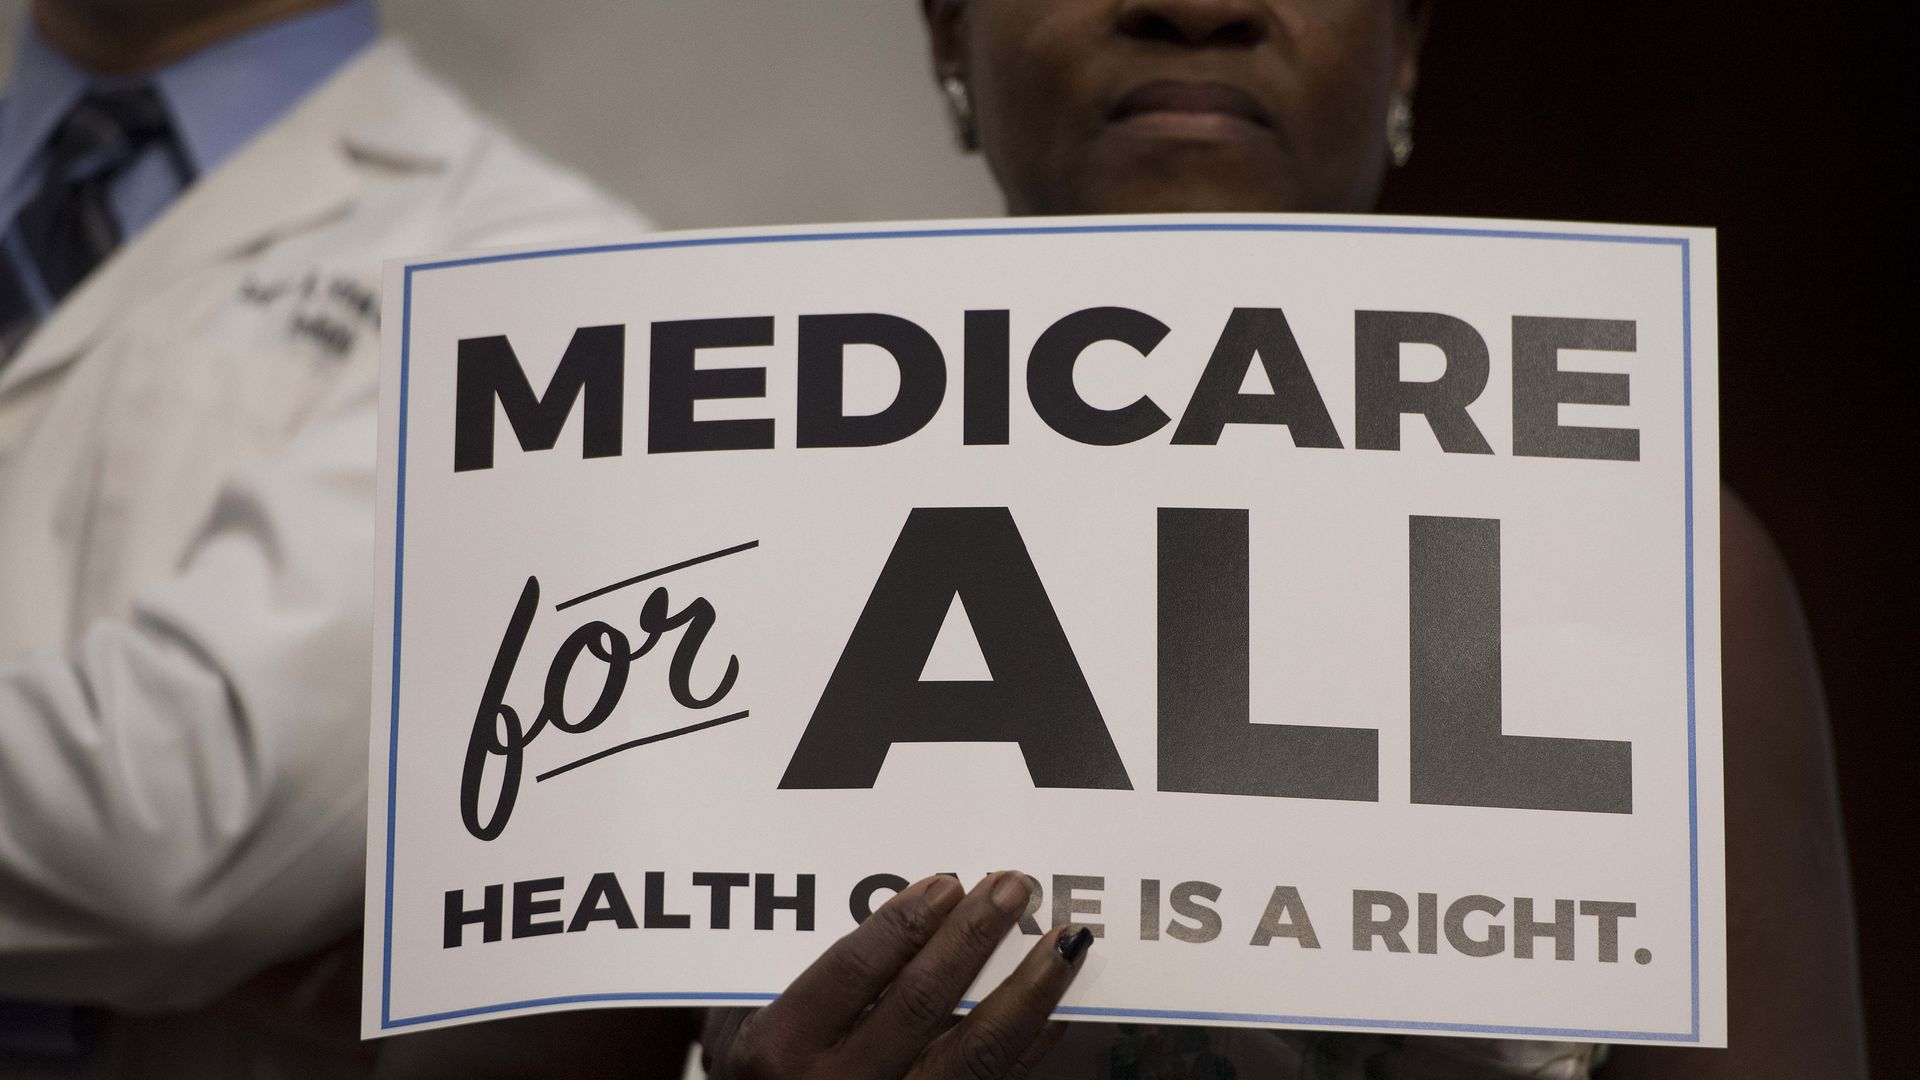 A woman holds up a sign advocating for "Medicare for All" 